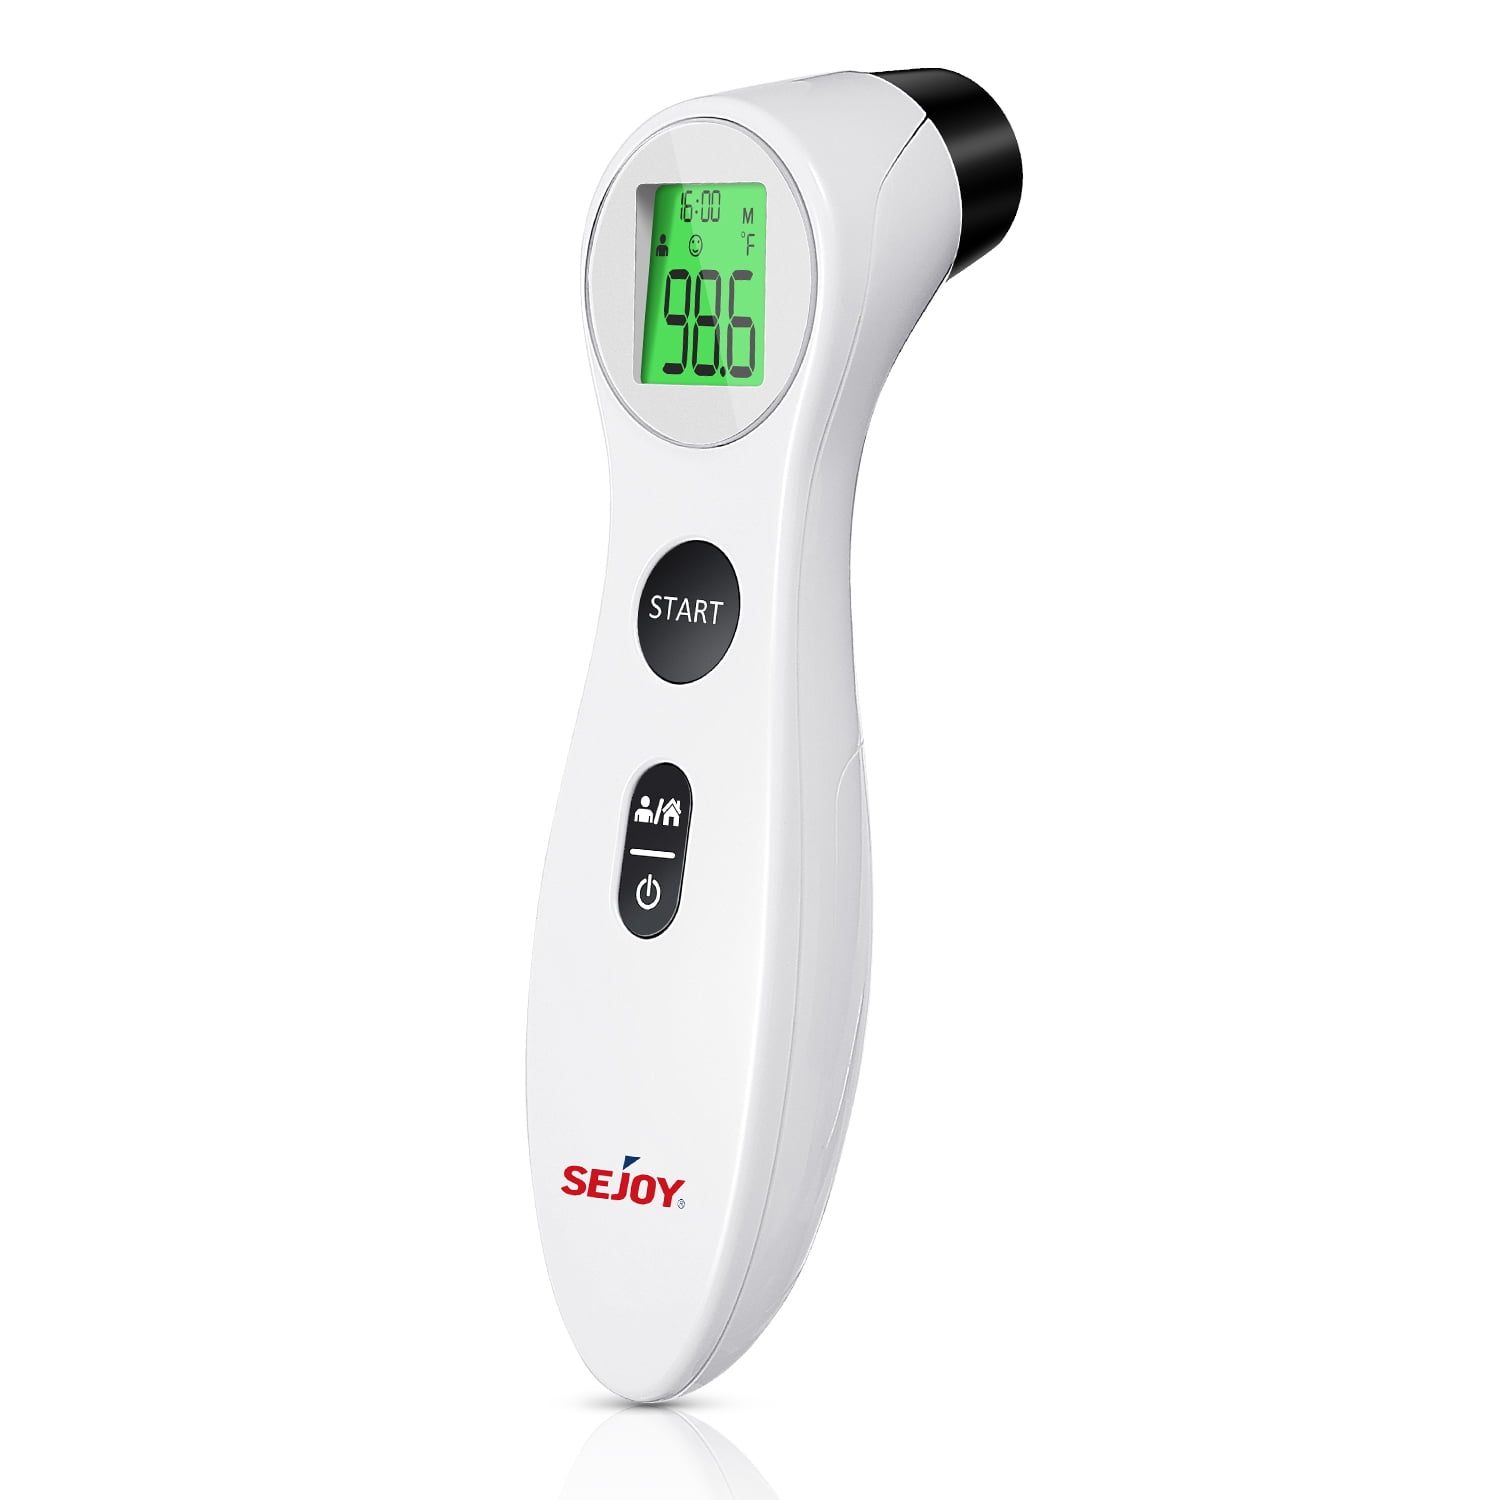 Ear Forehead Infrared Thermometer LCD Display Suits Newborn Baby/Child/Adult 